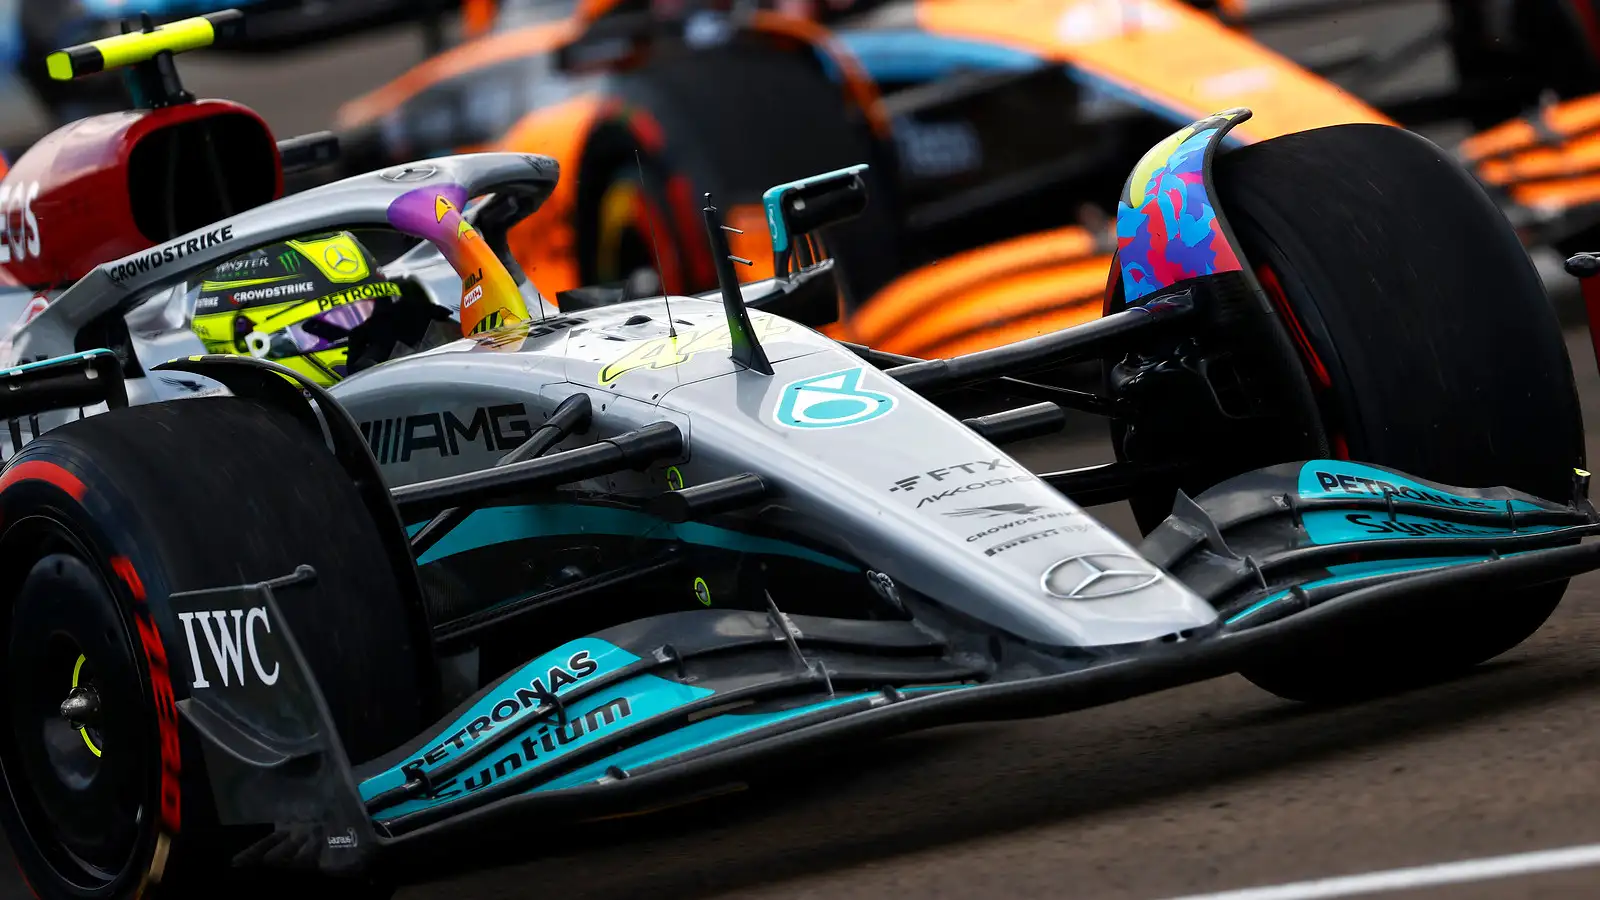 Lewis Hamilton drives his Mercedes during practice for the Miami Grand Prix. Miami, May 2022